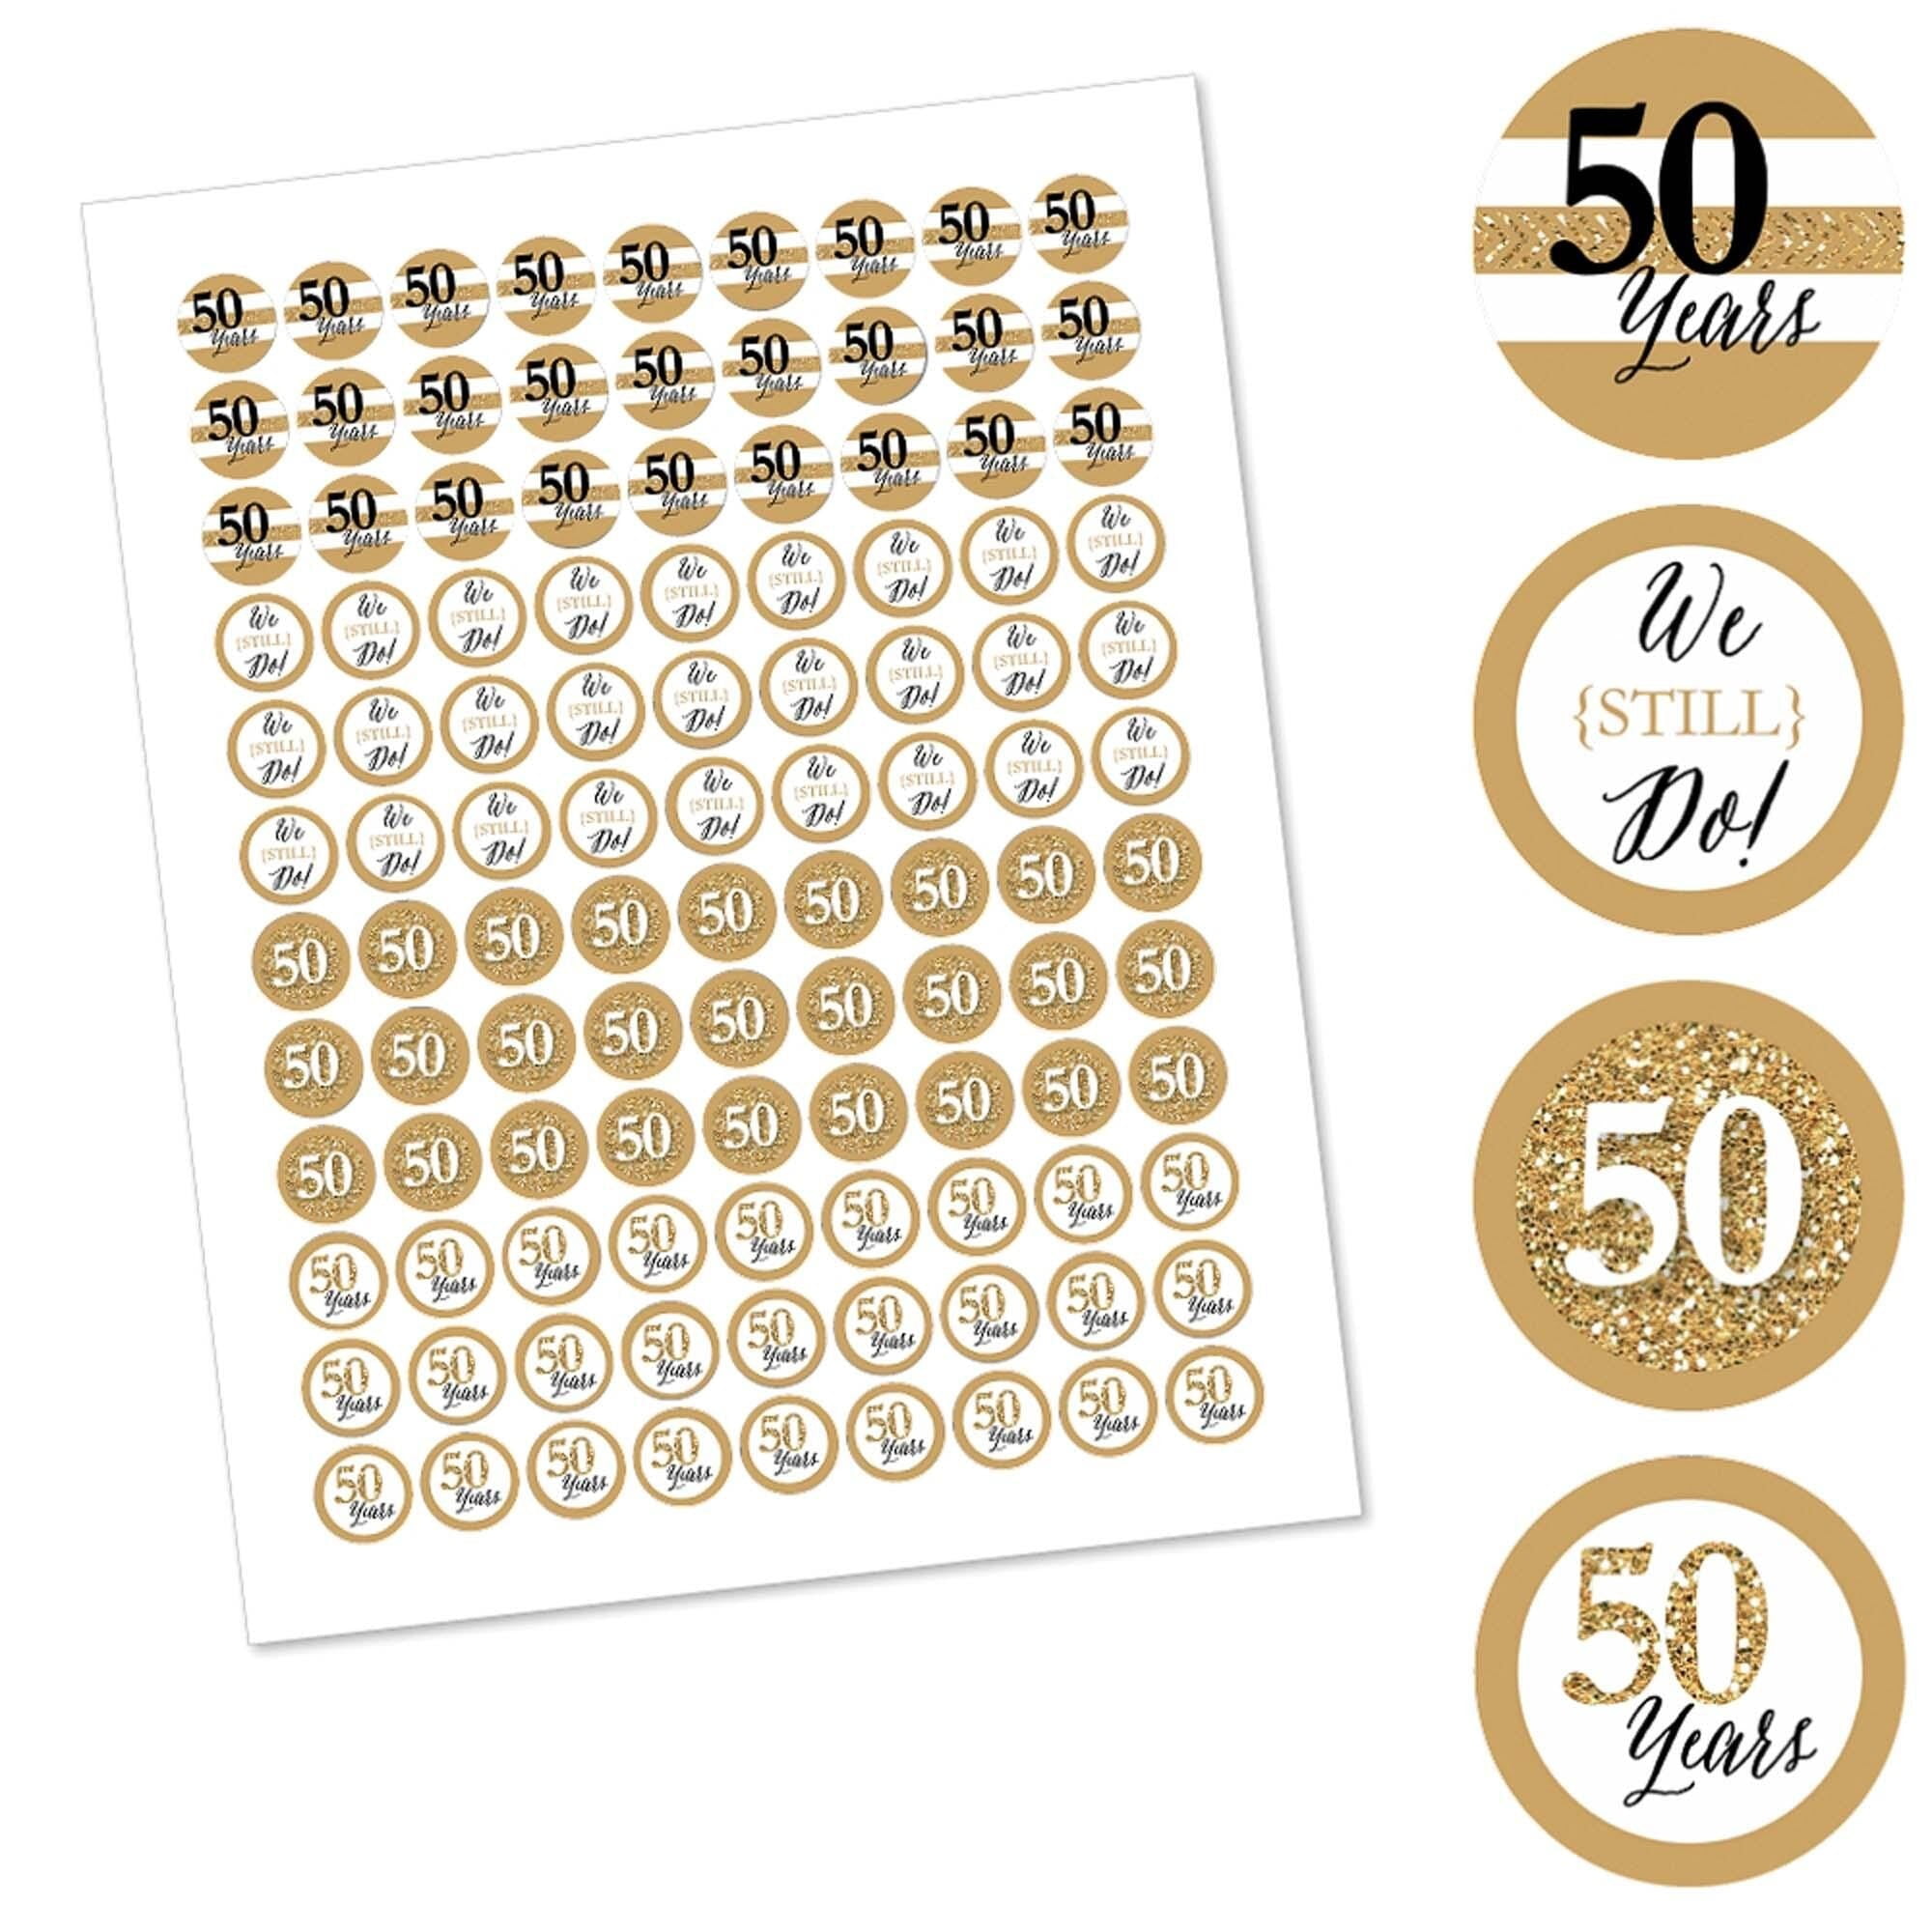 Big Dot Of Happiness We've Got Spirit - Small Round Candy Stickers - Party  Favor Labels - 324 Ct